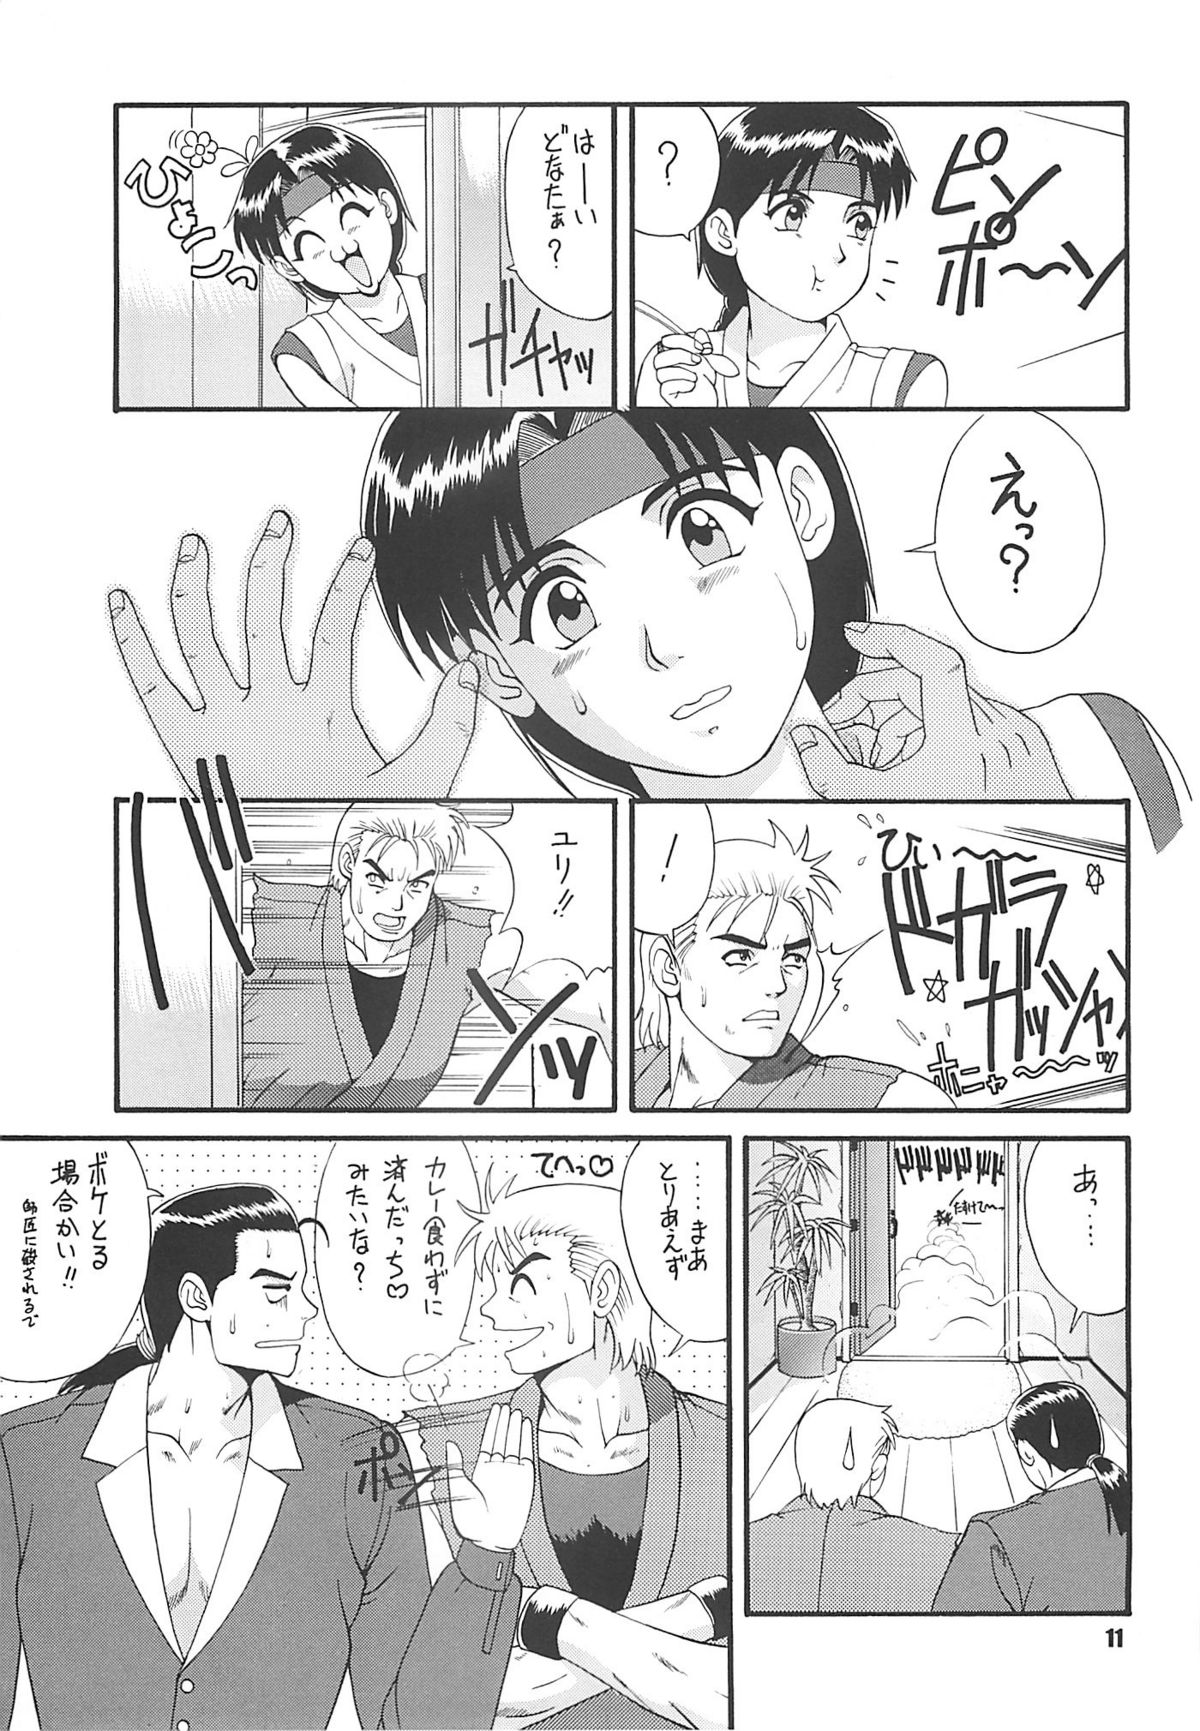 (CR22) [Saigado (Ishoku Dougen)] The Yuri & Friends '97 (King of Fighters) page 10 full